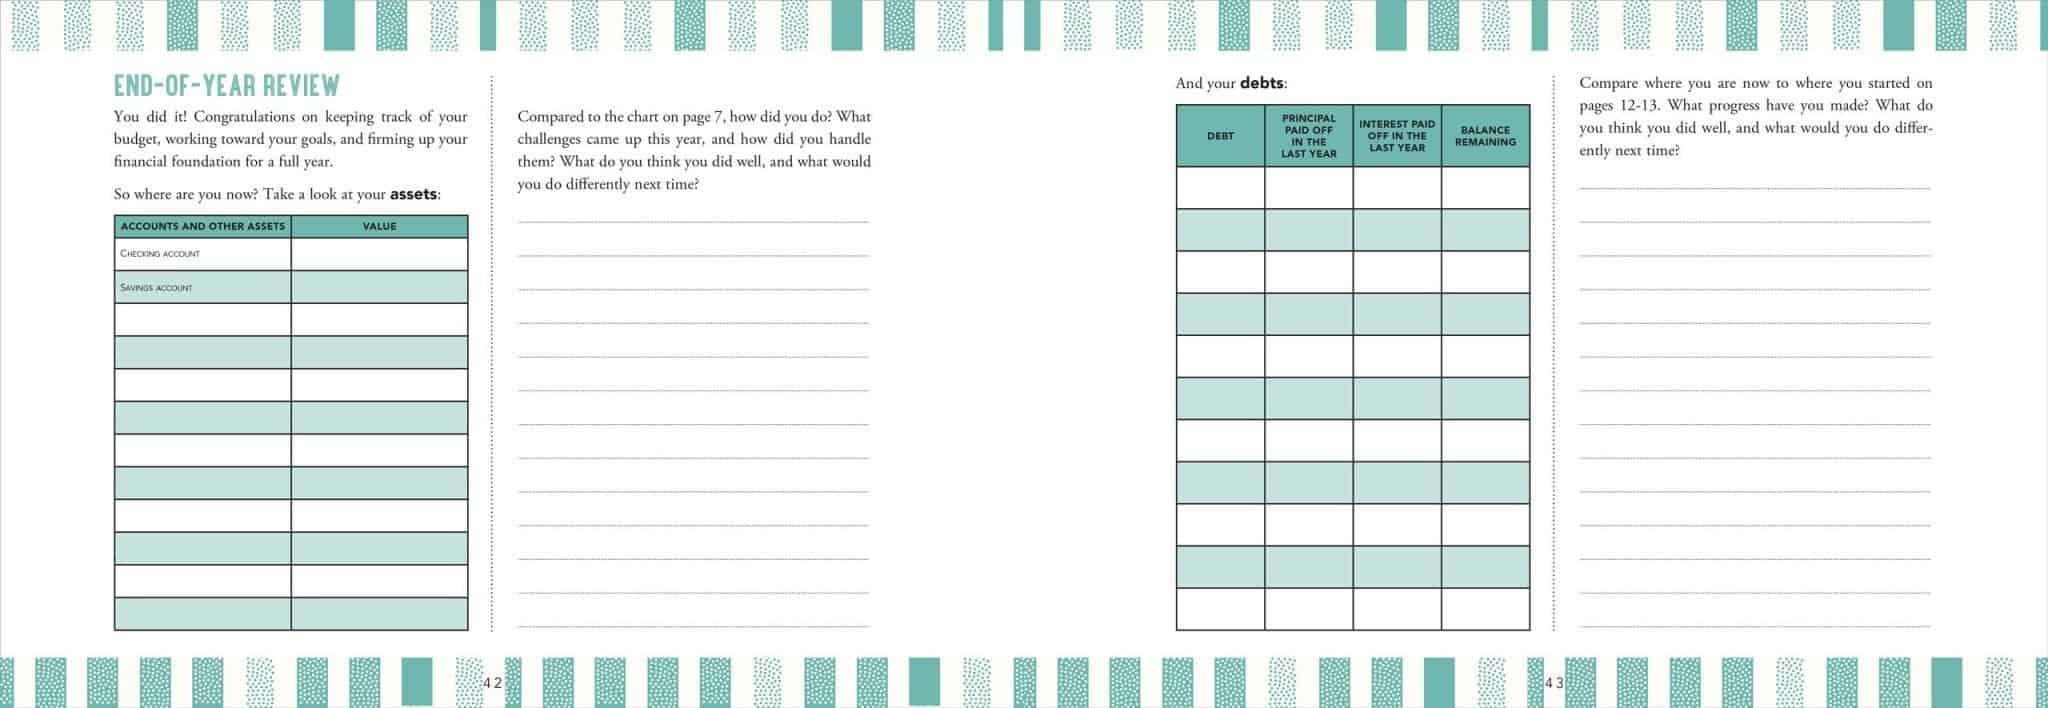 Budget tracker, plan the perfect budget. Use a budget to save more money each month